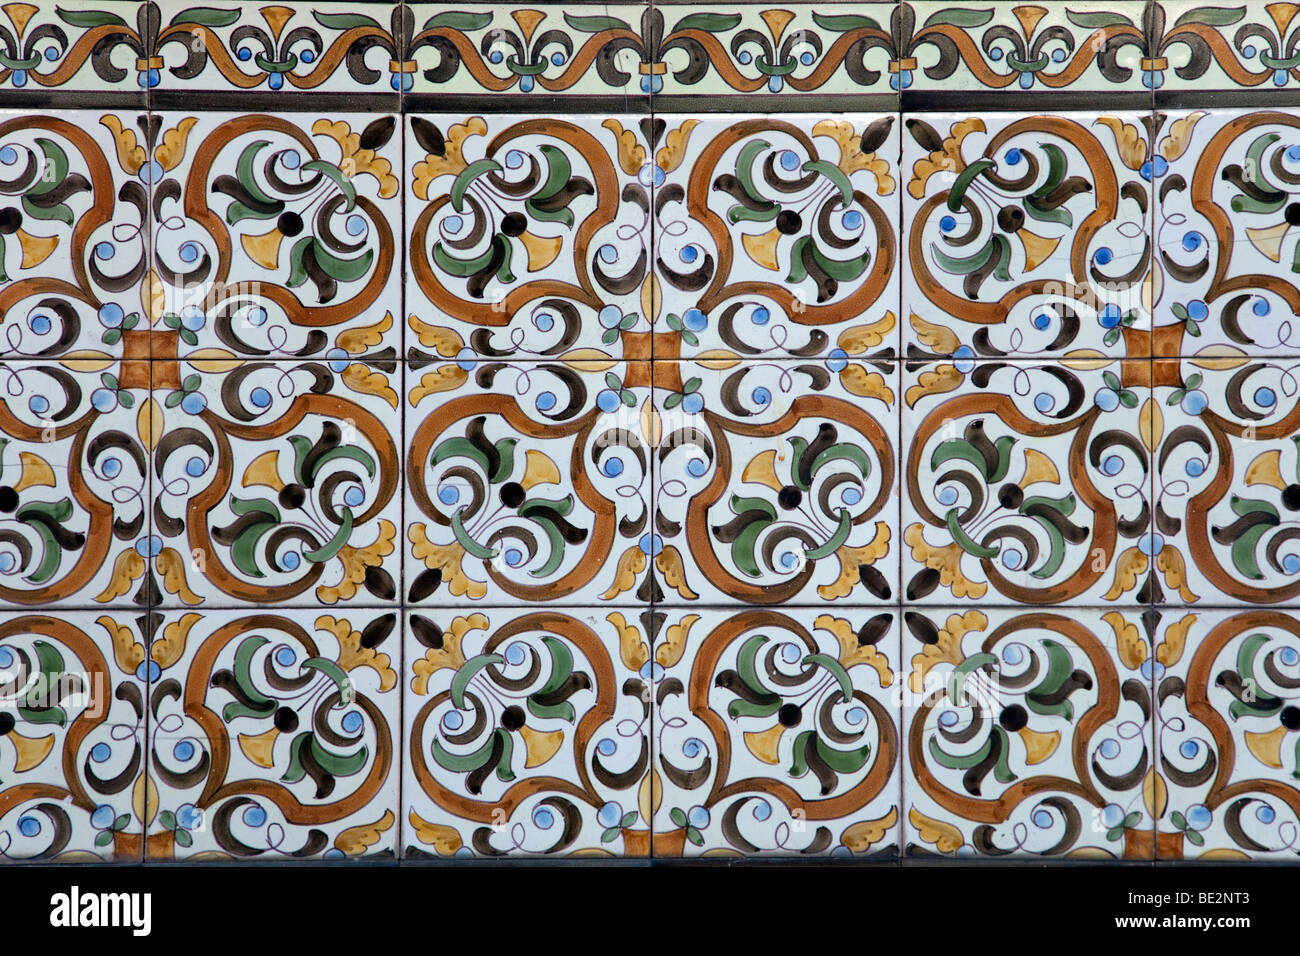 old traditional Portuguese ceramic tiles Stock Photo